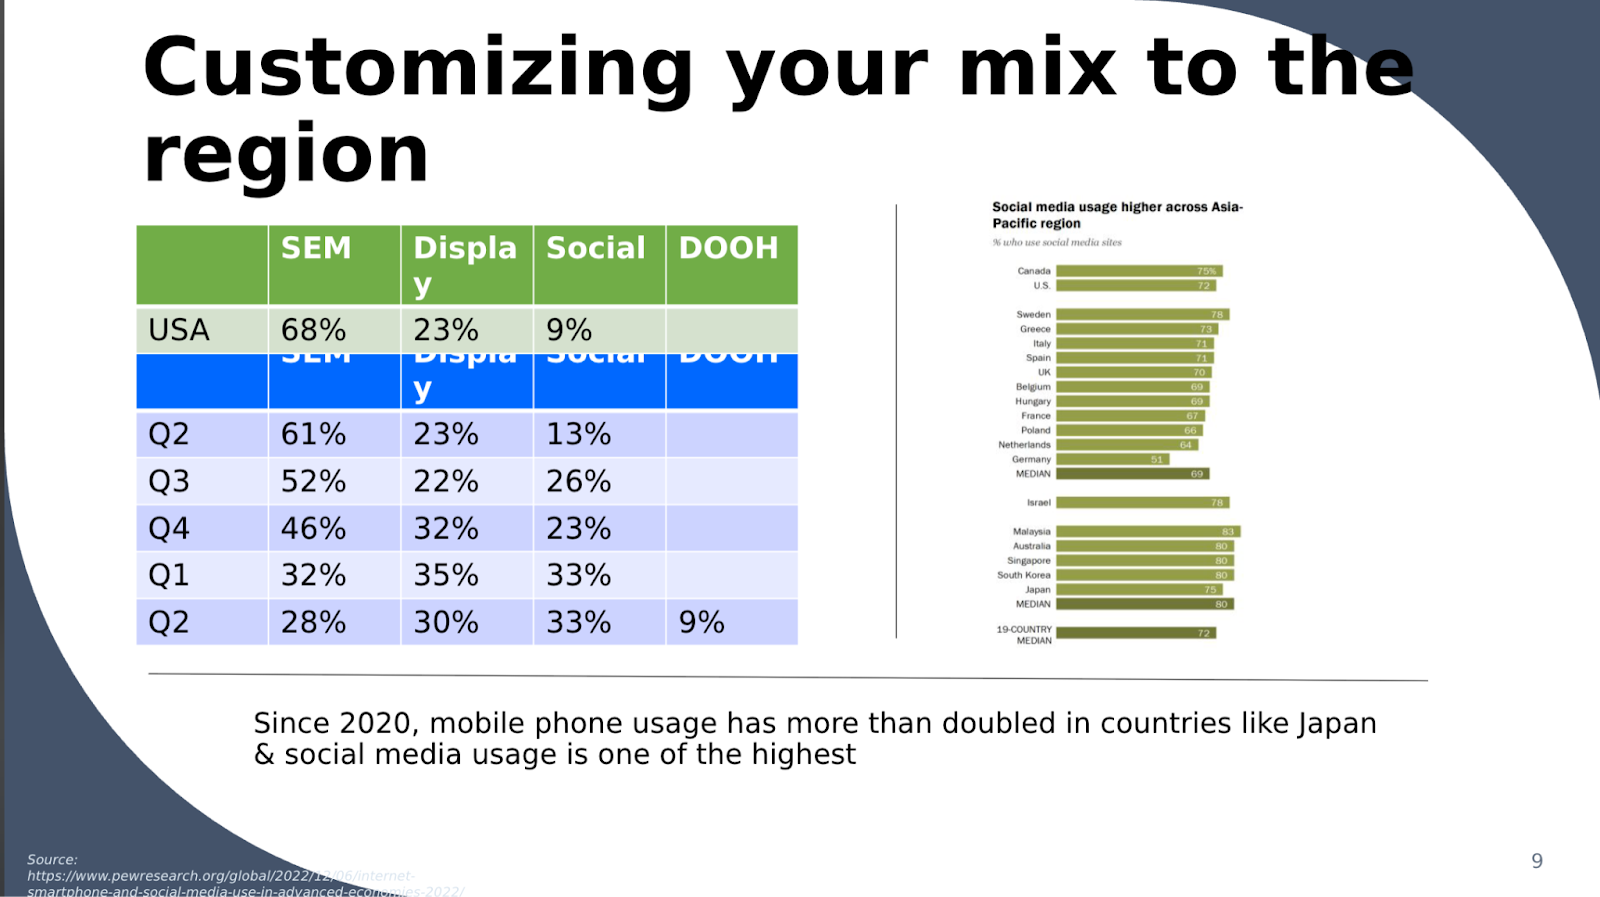 Customizing your mix to the region - two tables that show mobile phone usage across different countries. It says, since 2020, mobile phone usage has more than doubled in countries like Japan and social media usage is one of the highest. 